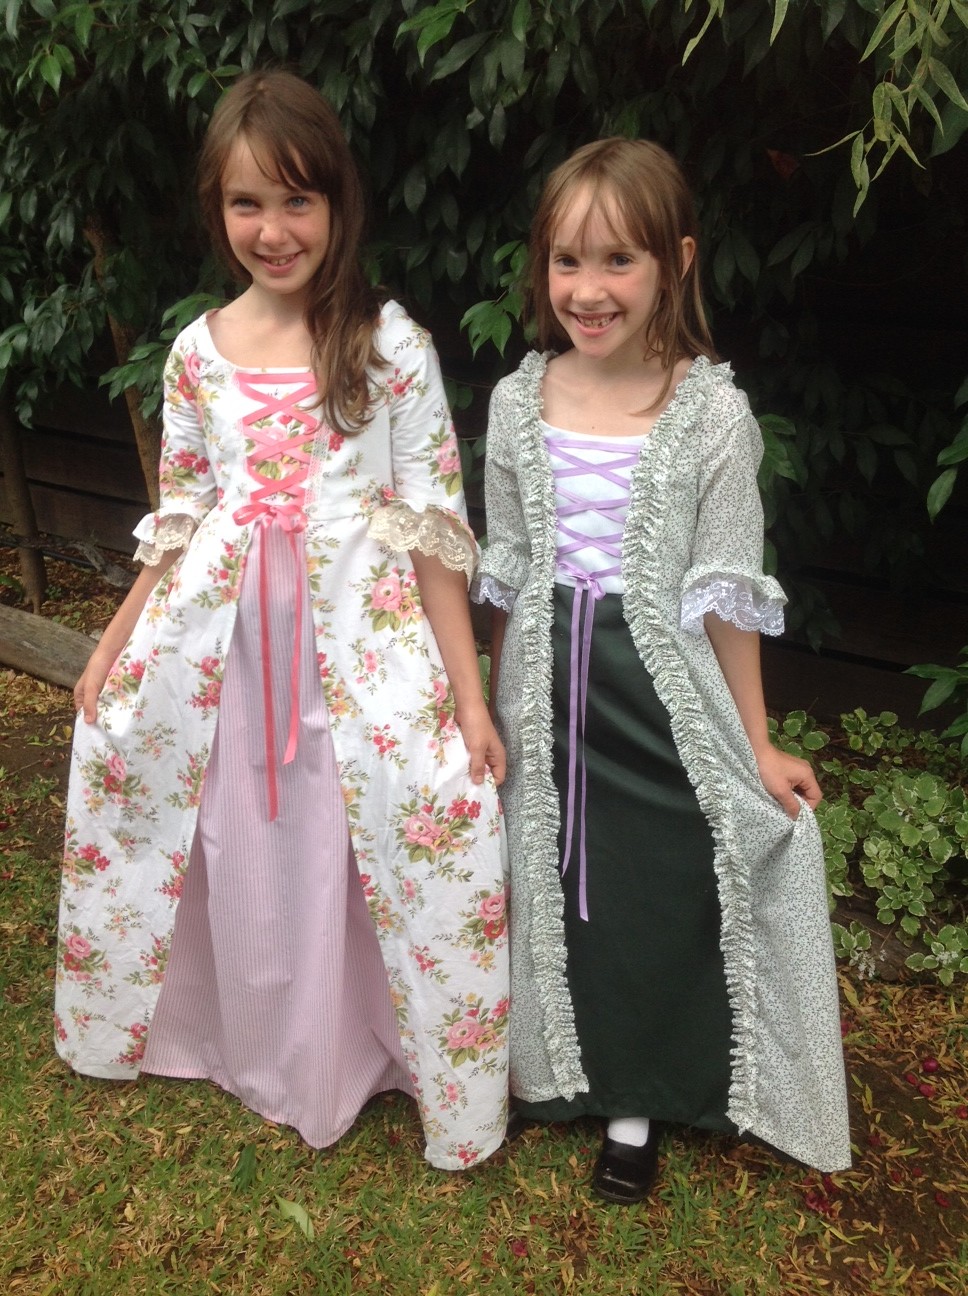 Let's Make Colonial Costumes for Girls! — Sense & Sensibility Patterns